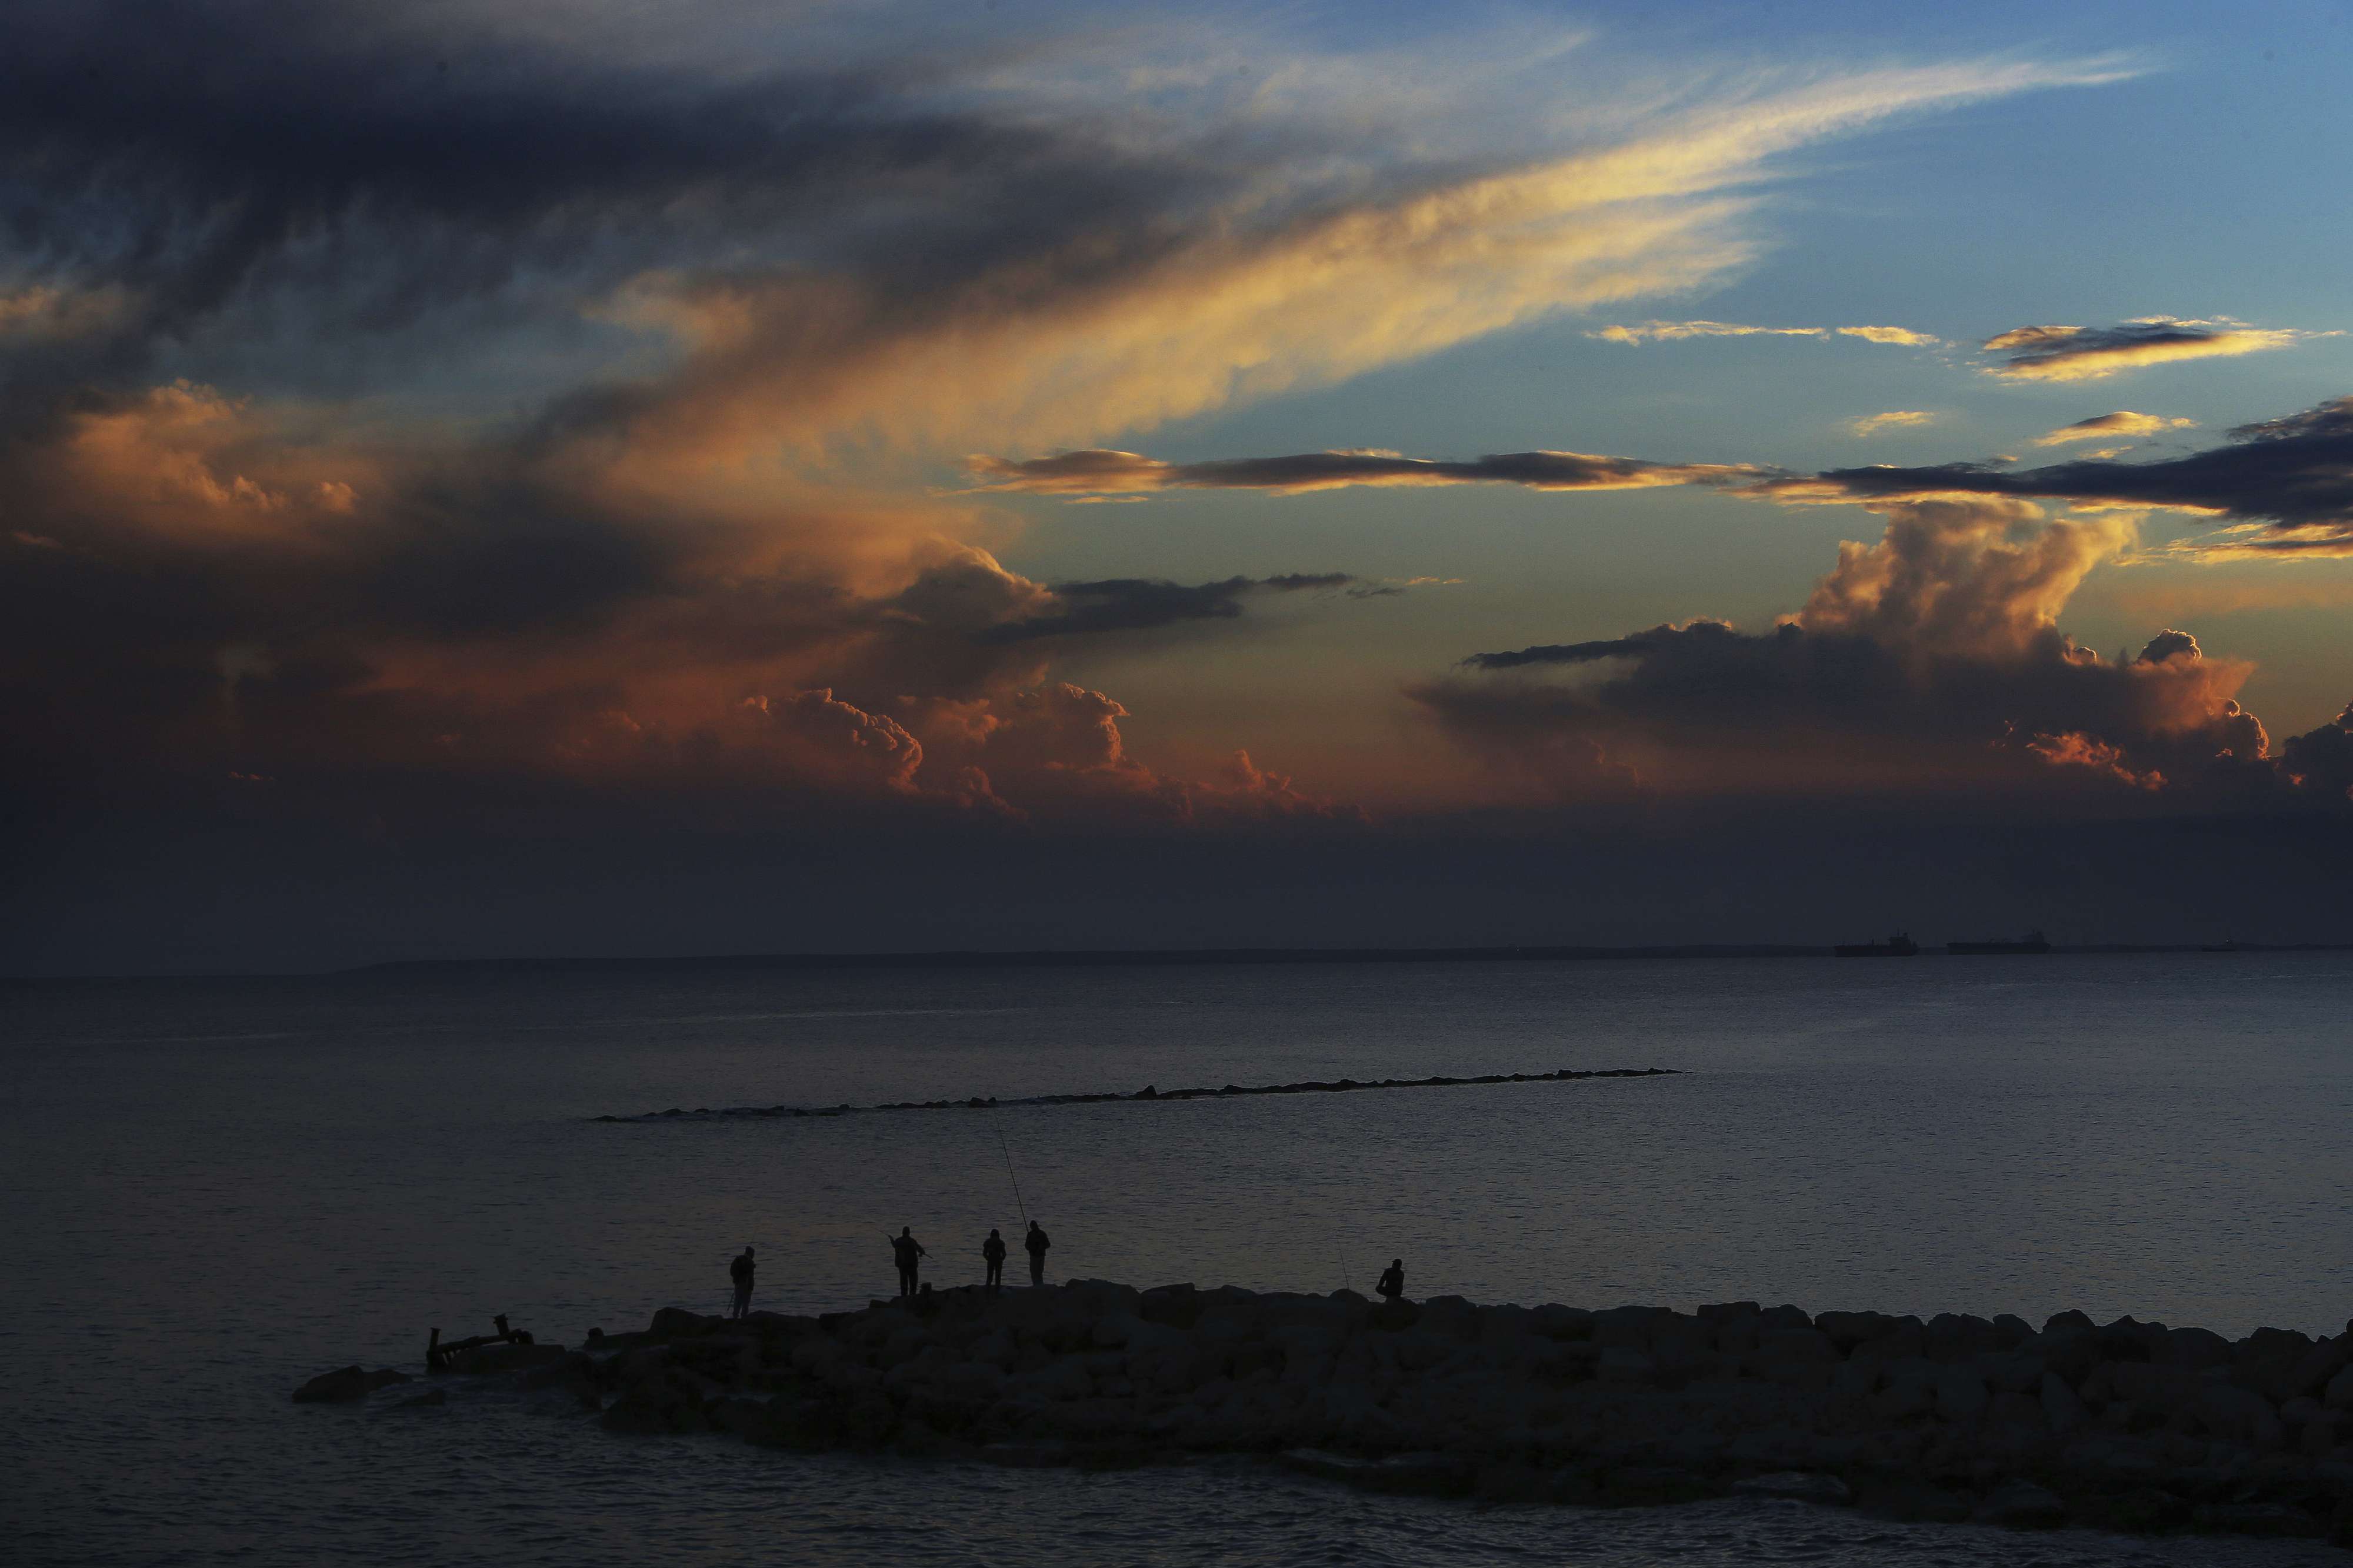 Men fishing with their fishing rods at the sea during a sunset in the southern port city of Limassol, Cyprus, Friday, Feb. 23, 2018.